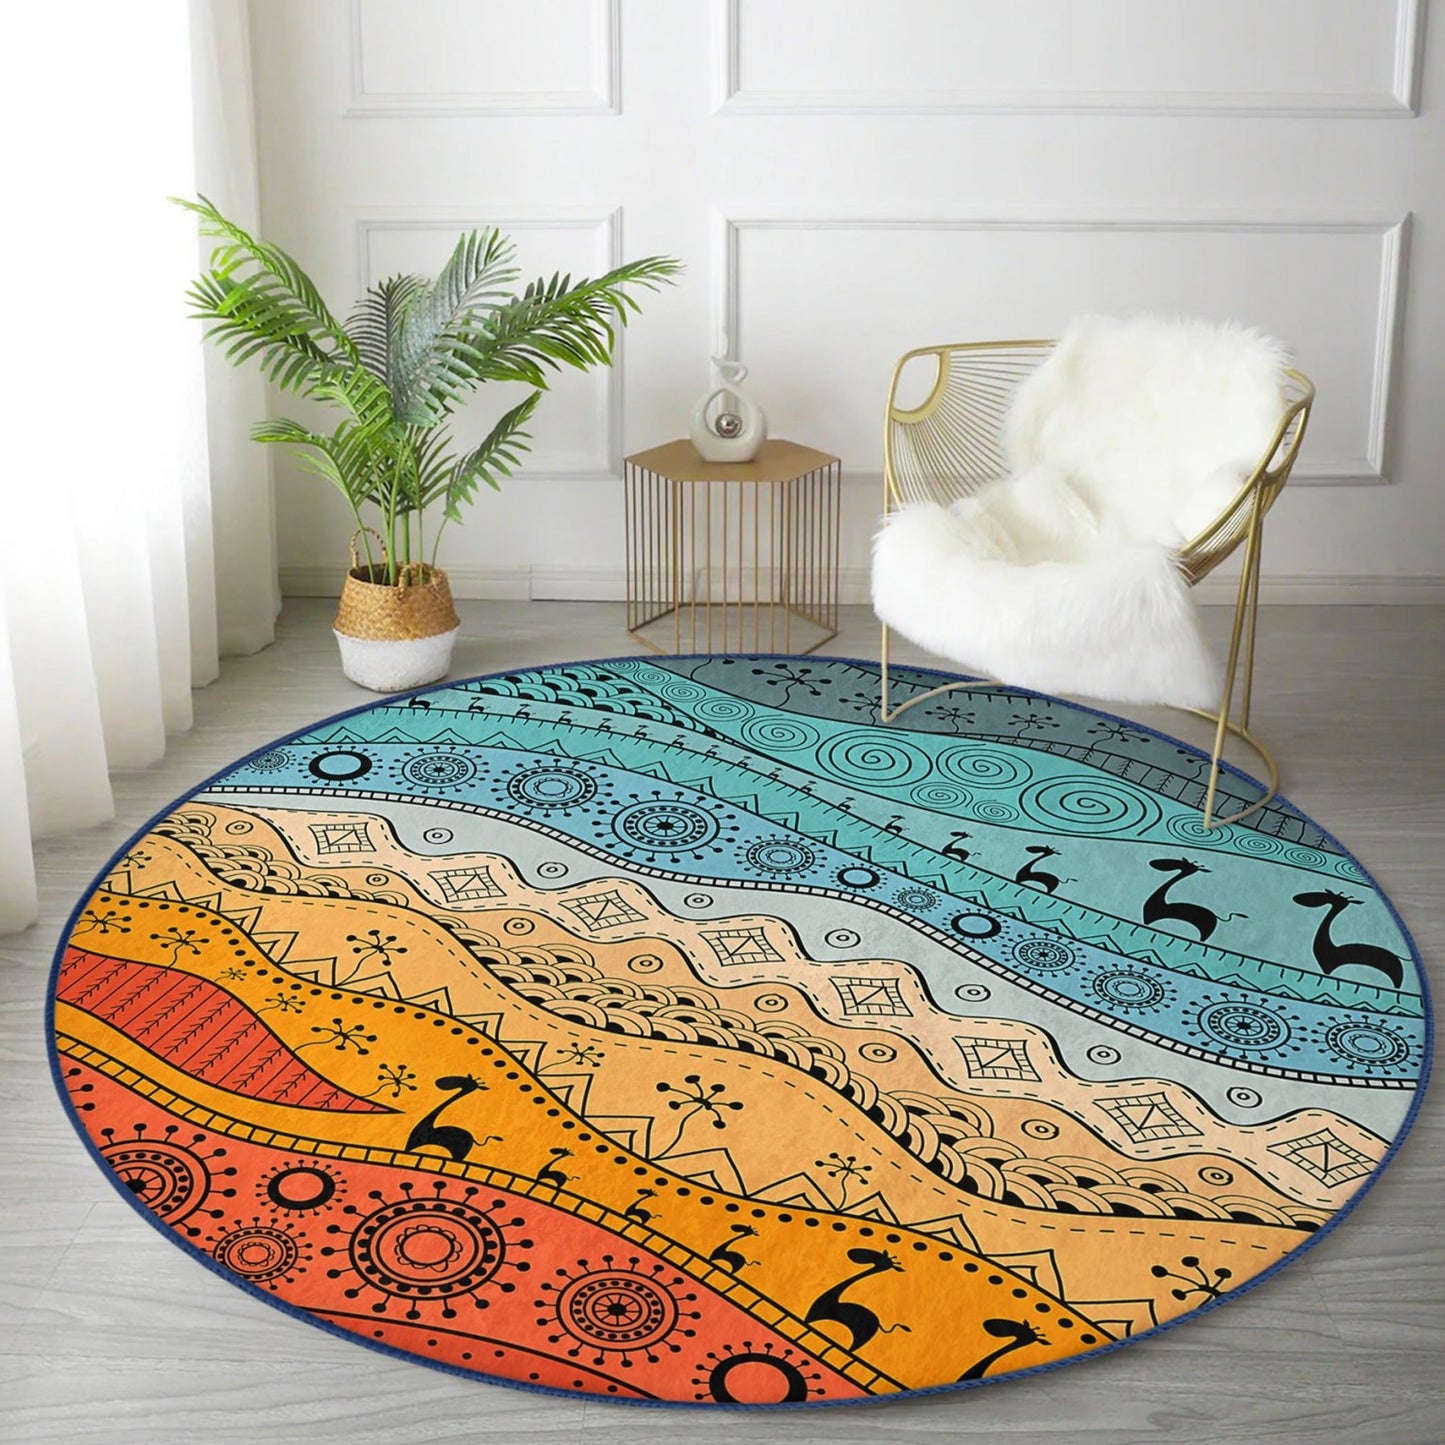 Abstract Circle Carpet, Abstract Round Rug, Bedroom Decorative Floor